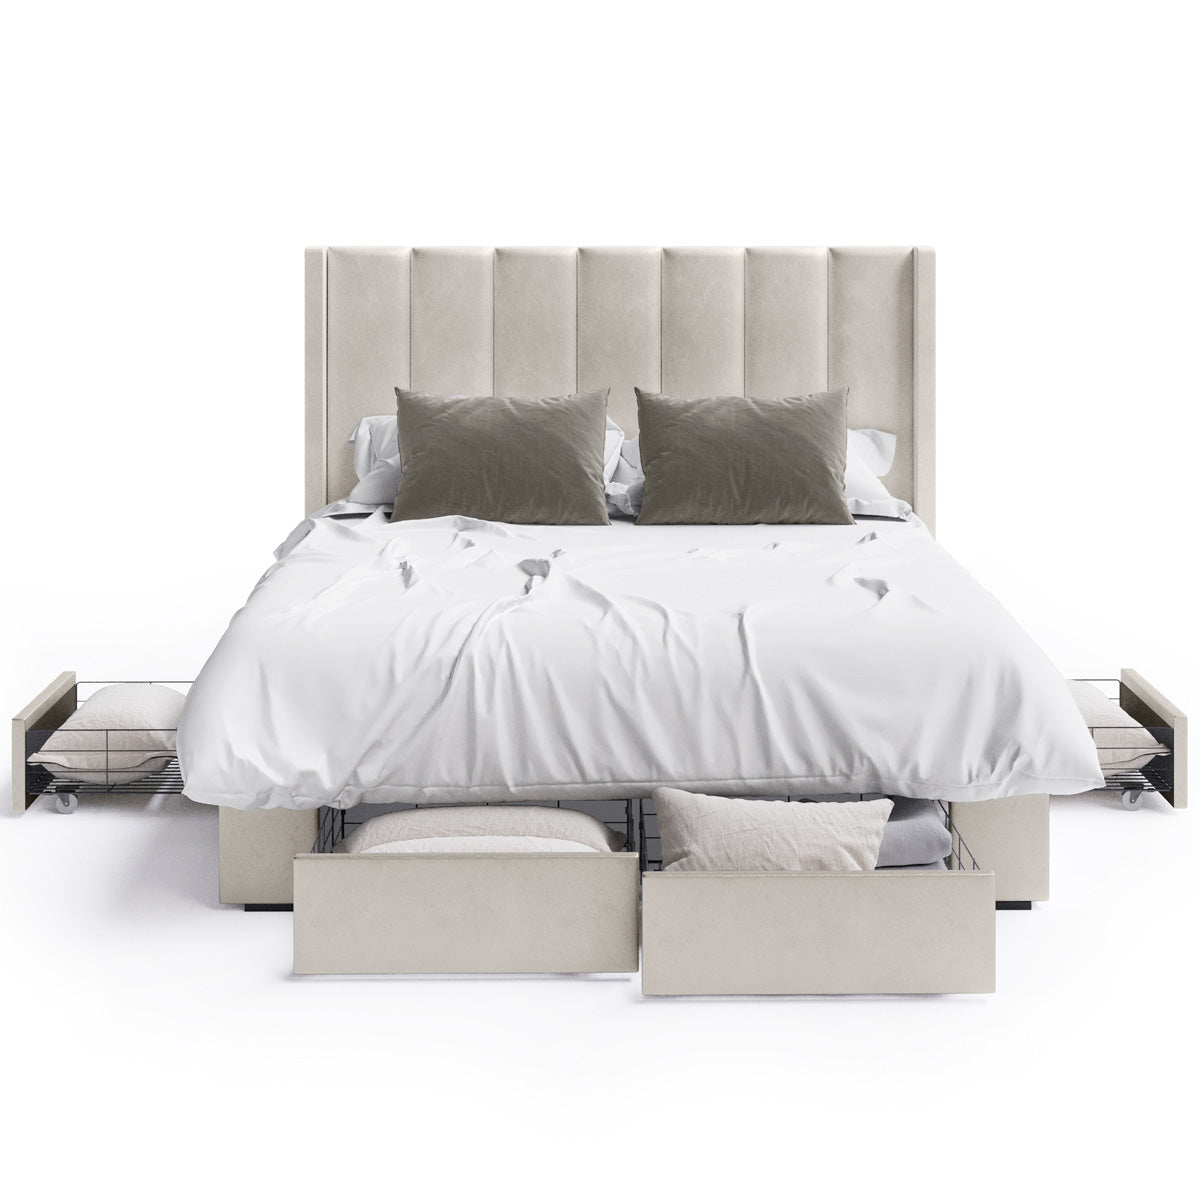 Emilie Winged Storage Bed Frame with Four Extra Large Drawers (Taupe White Velvet)